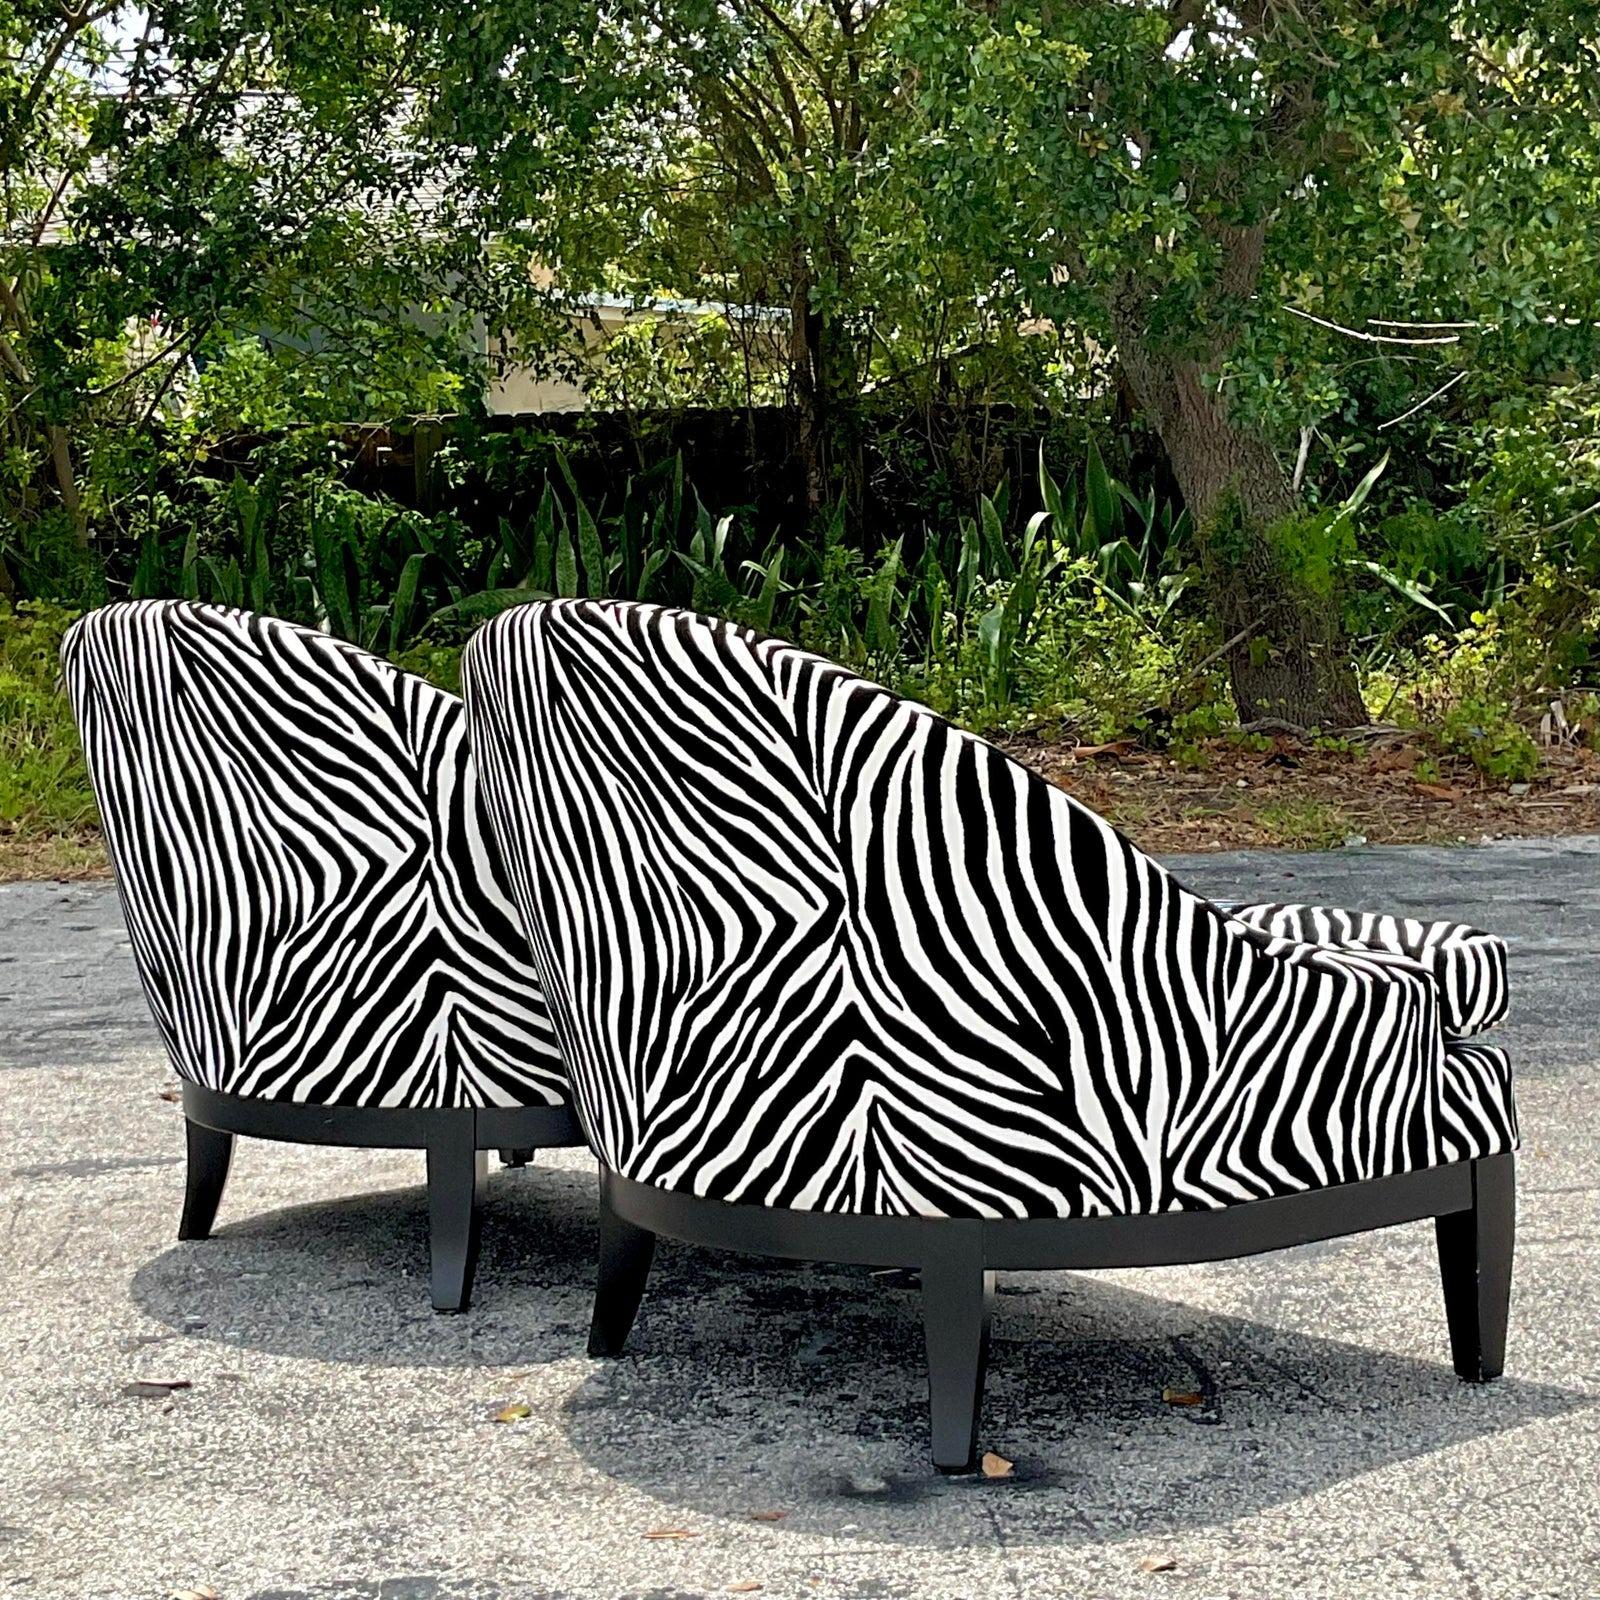 North American Vintage Boho Low Slung Zebra Lounge Chairs - a Pair For Sale